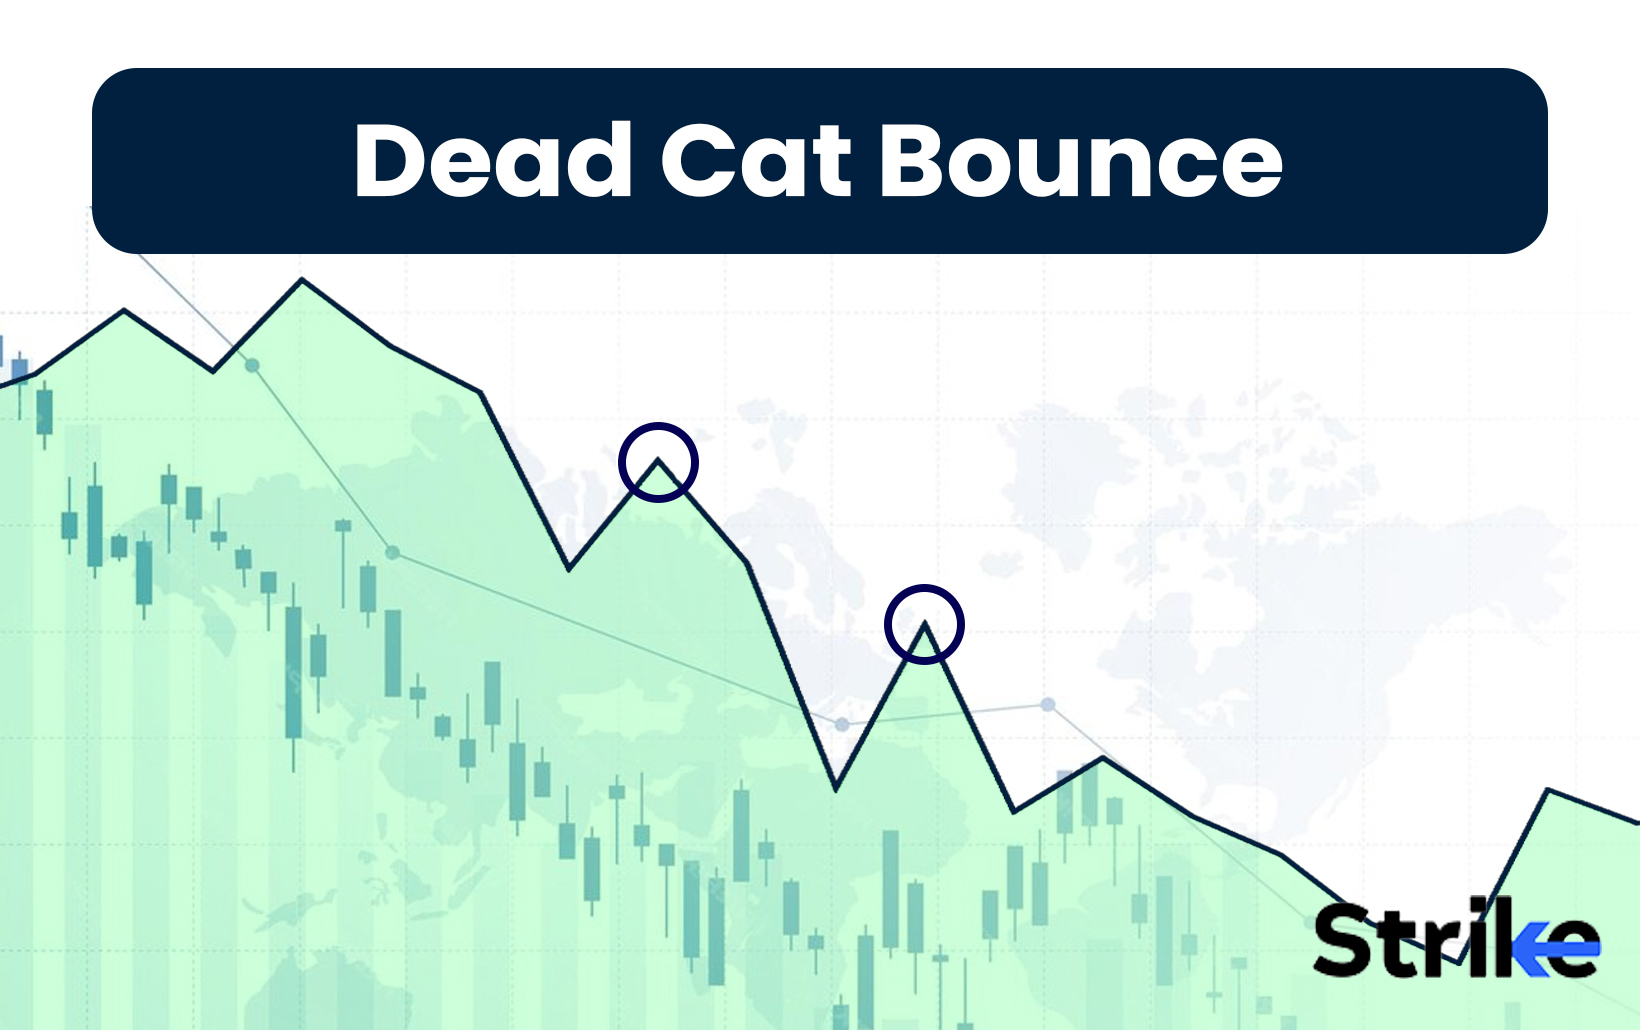 Dead Cat Bounce: Definition, History, Identification, Examples, Causes